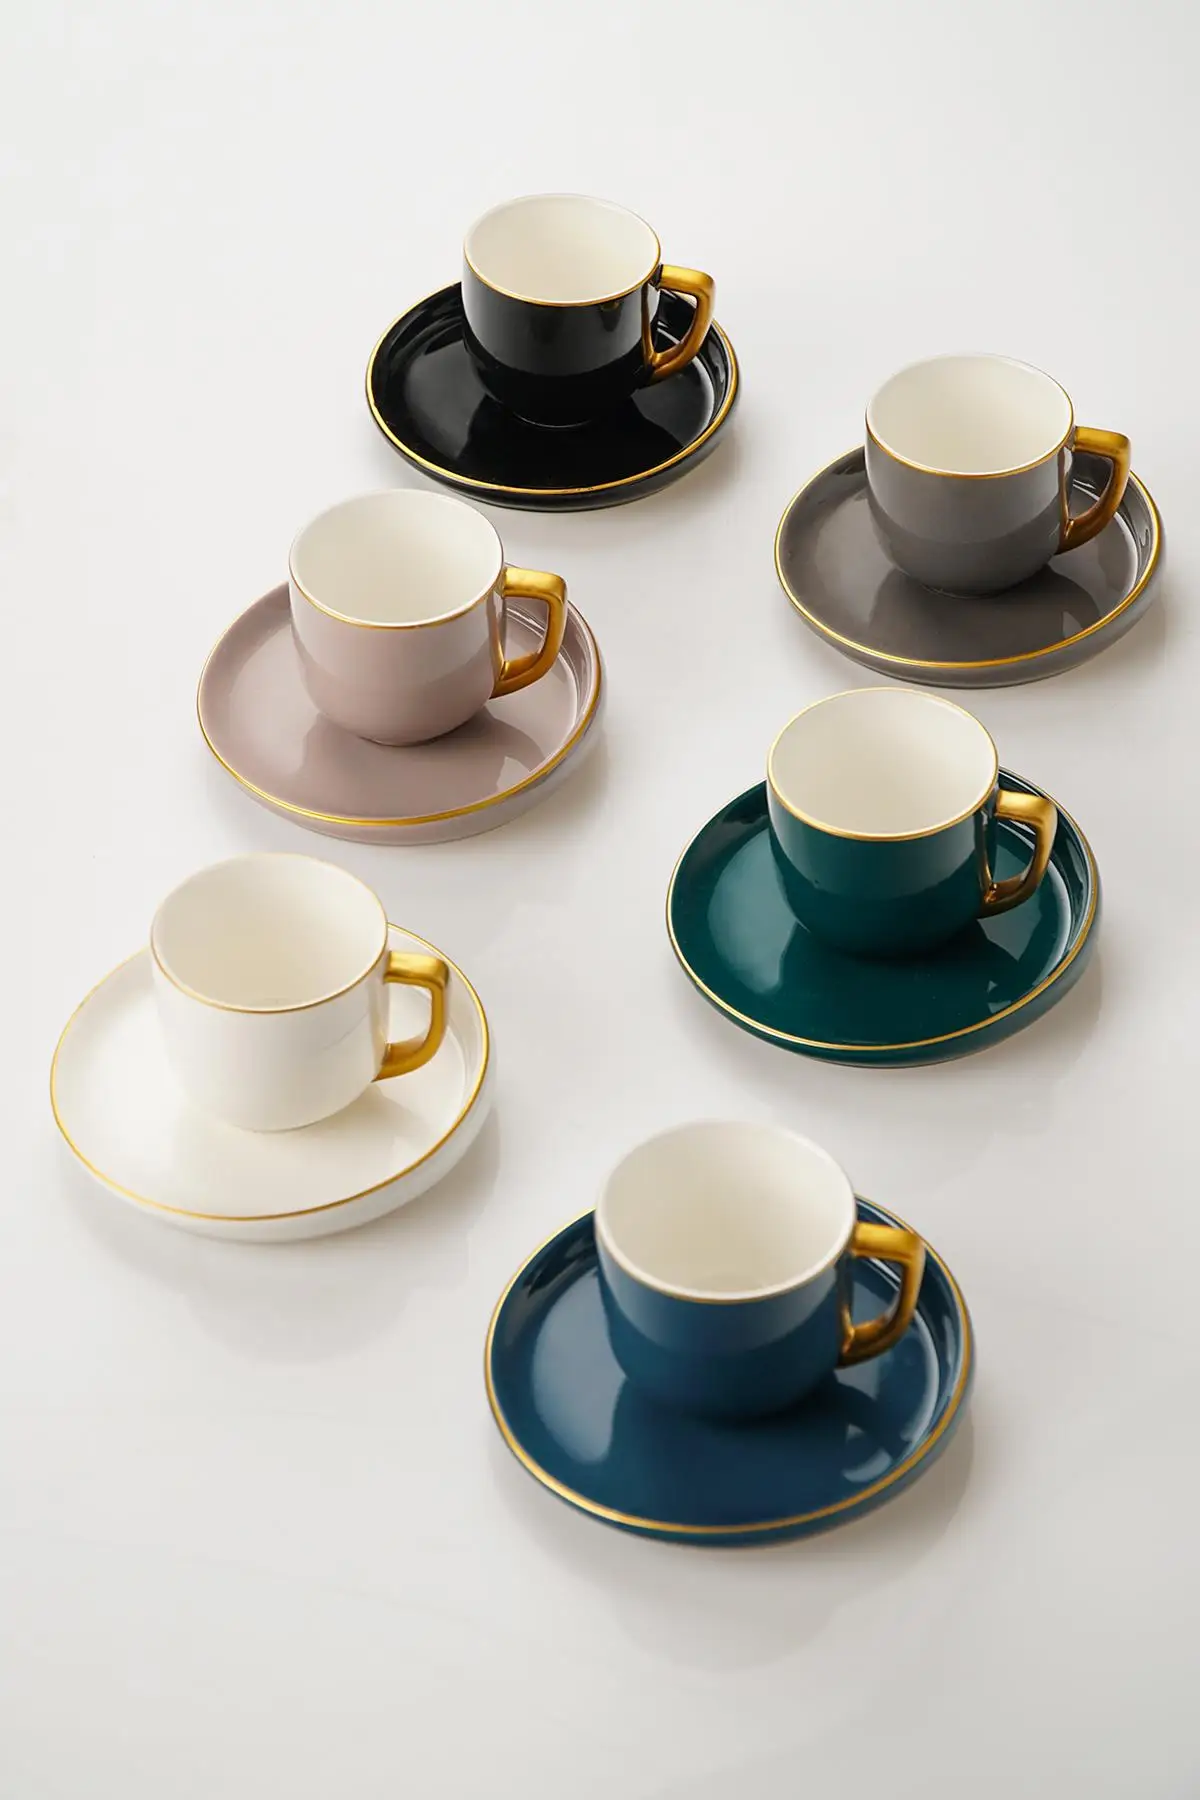 6-Piece Porcelain Coffee Cup Set, Small Coffee Cup, Turkish Coffee Cup, Porcelain Espresso Cup 6-Piece Porcelain Coffee Cup Set